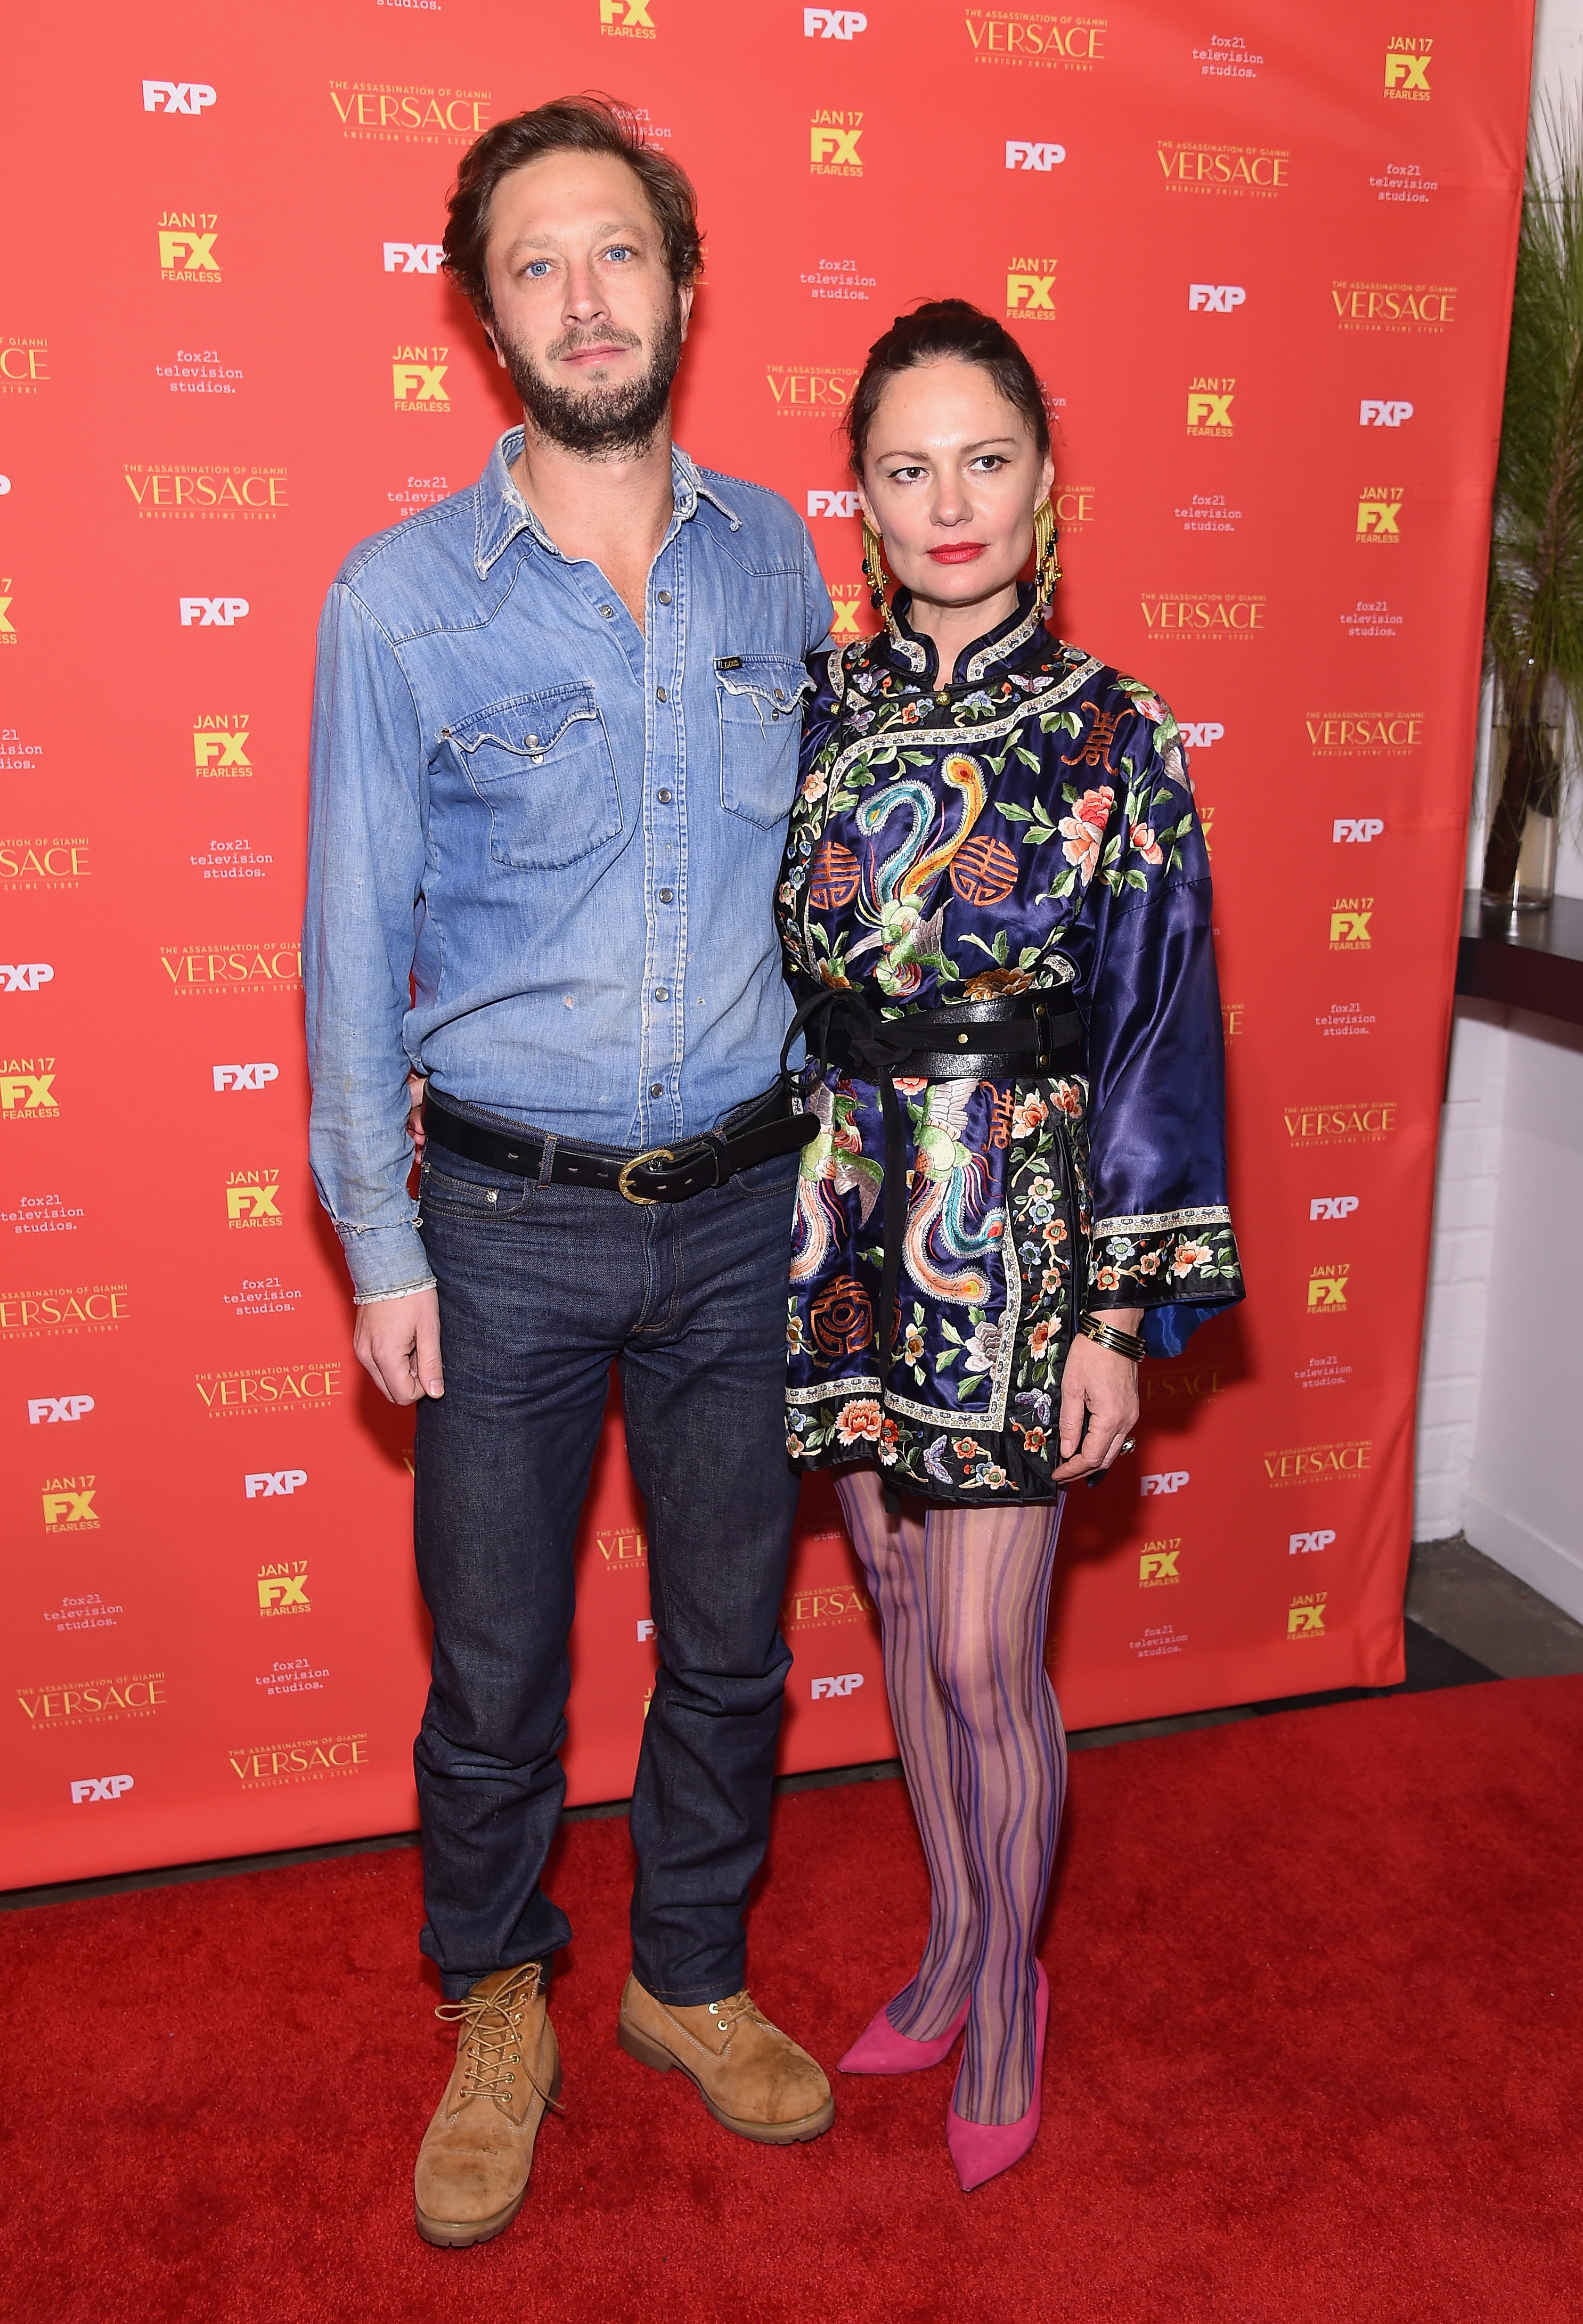 Ebon Moss-Bachrach and Yelena Yemchuk at the screening of "The Assassination Of Gianni Versace: American Crime Story" on December 11, 2017, in New York City. | Source: Getty Images